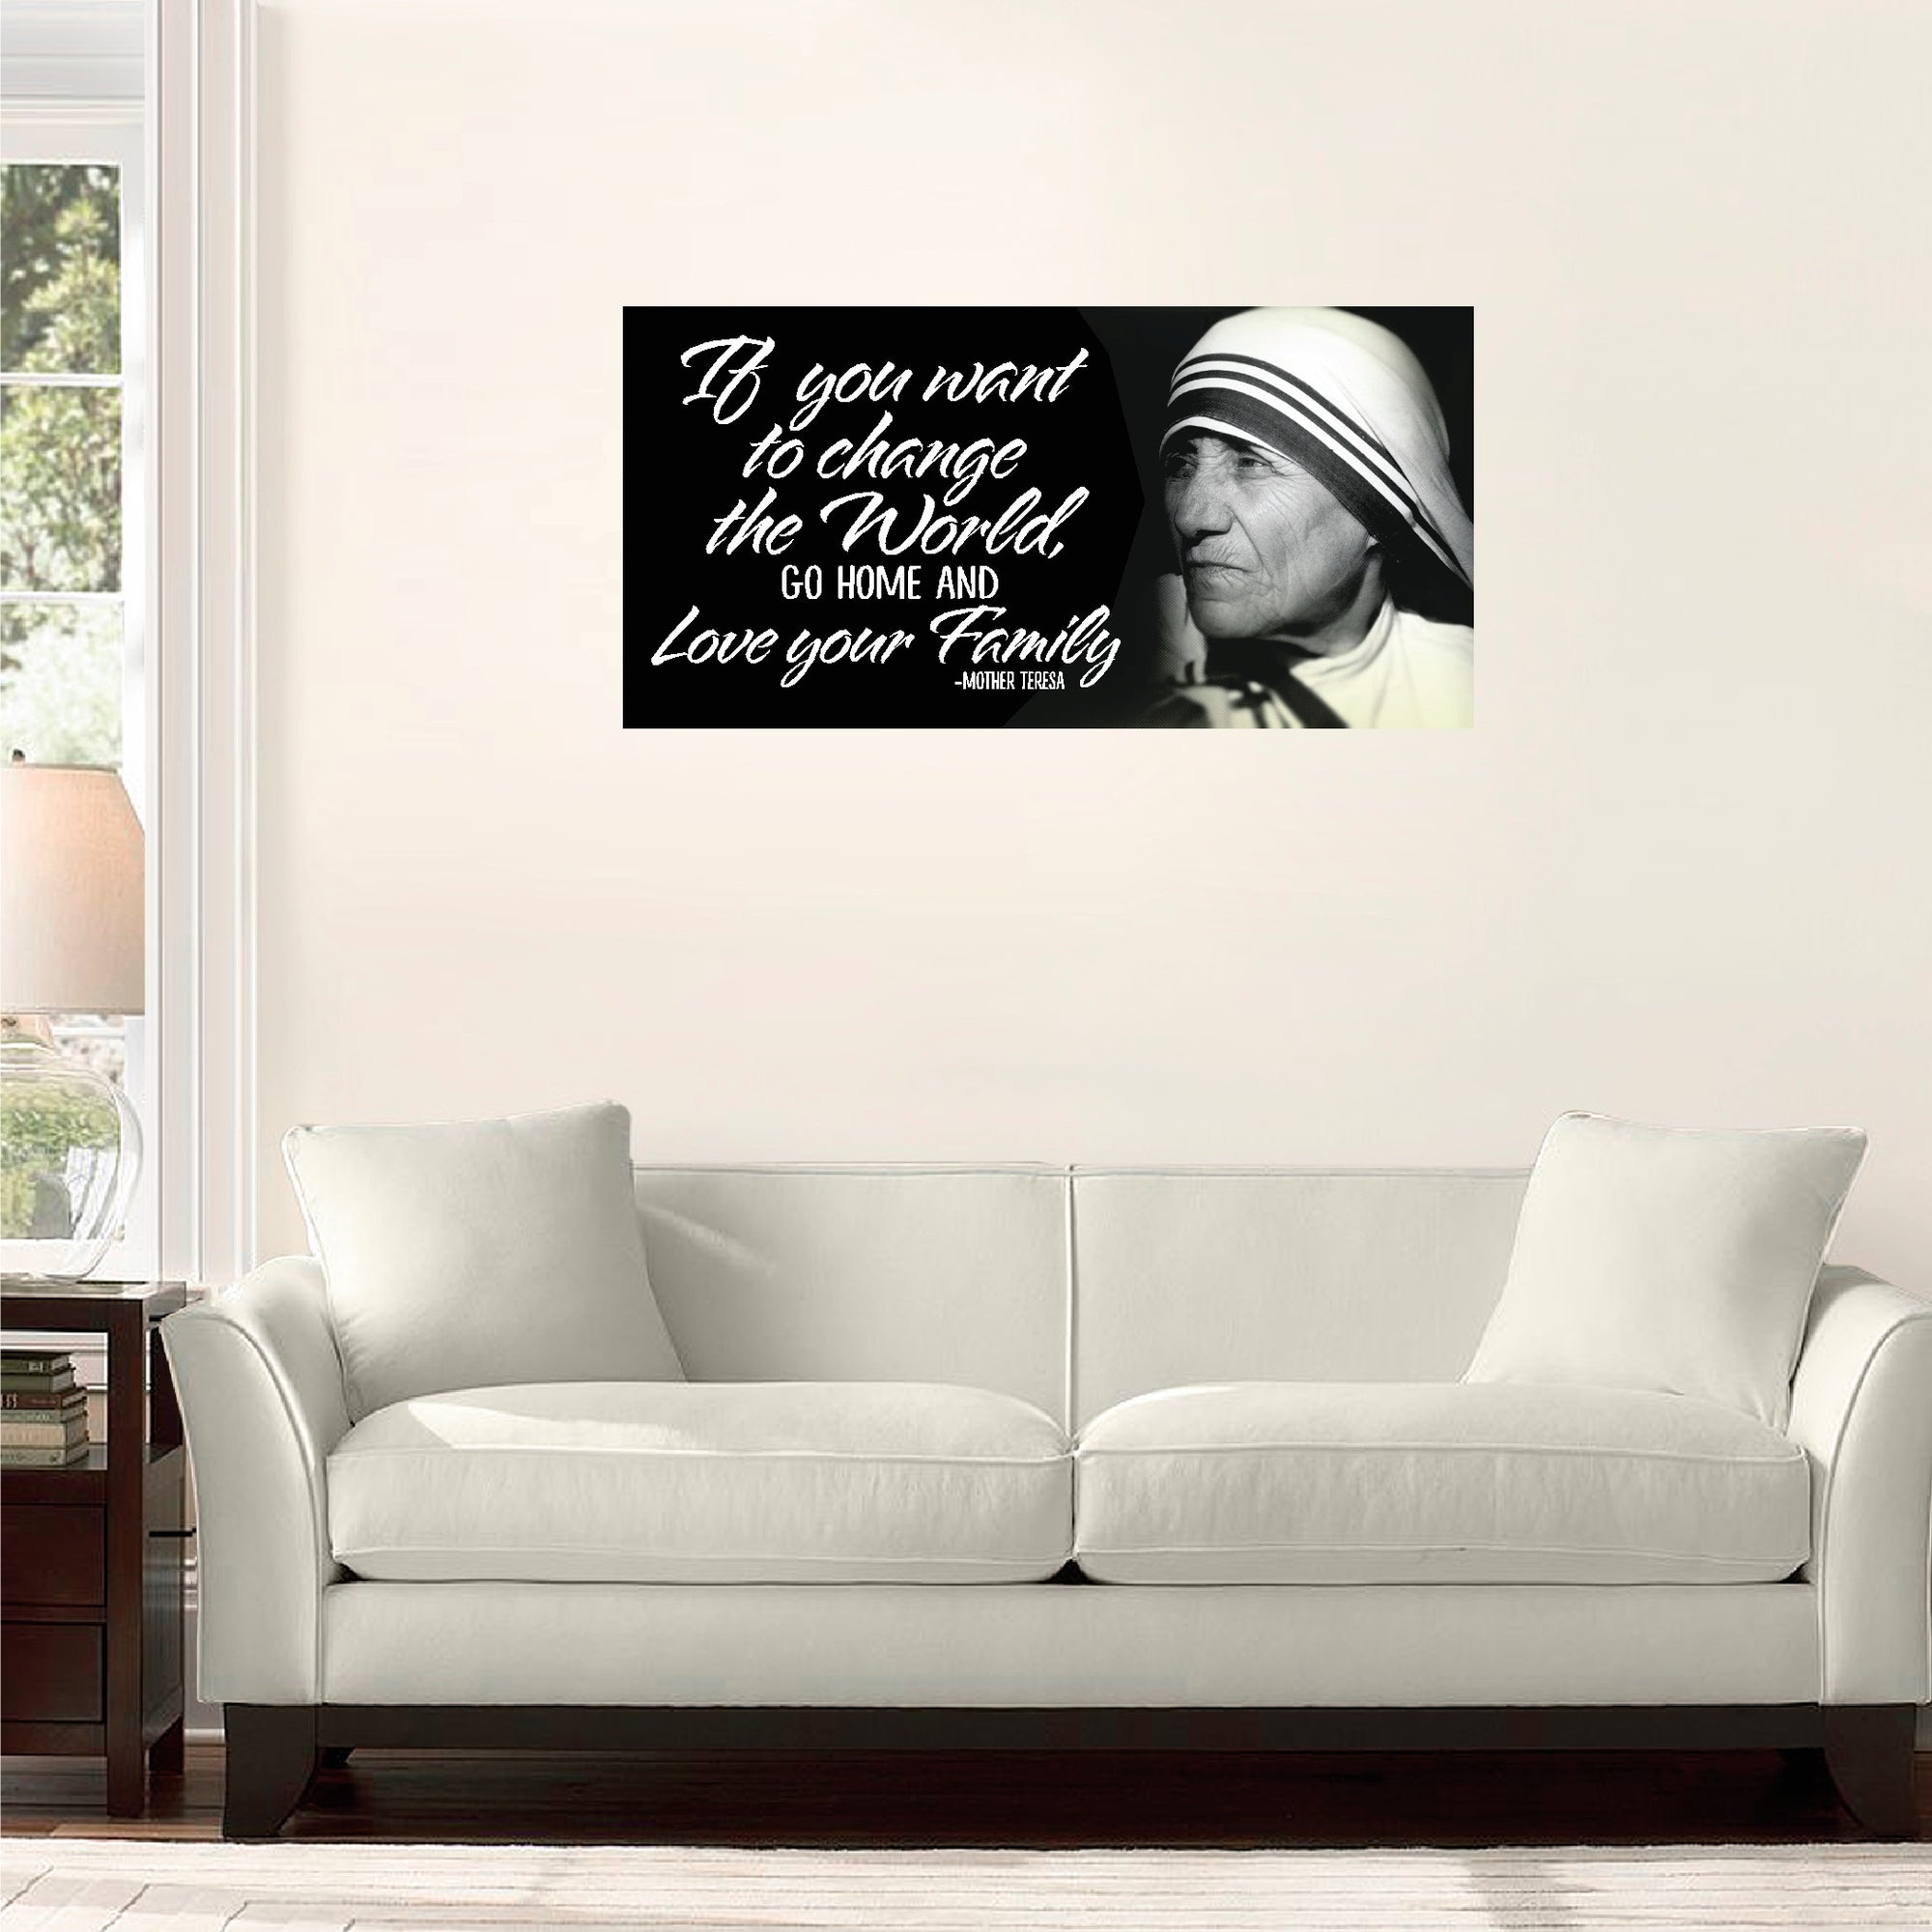 Mother Teresa If You Want To Change The World Go Home And Love Your Family print